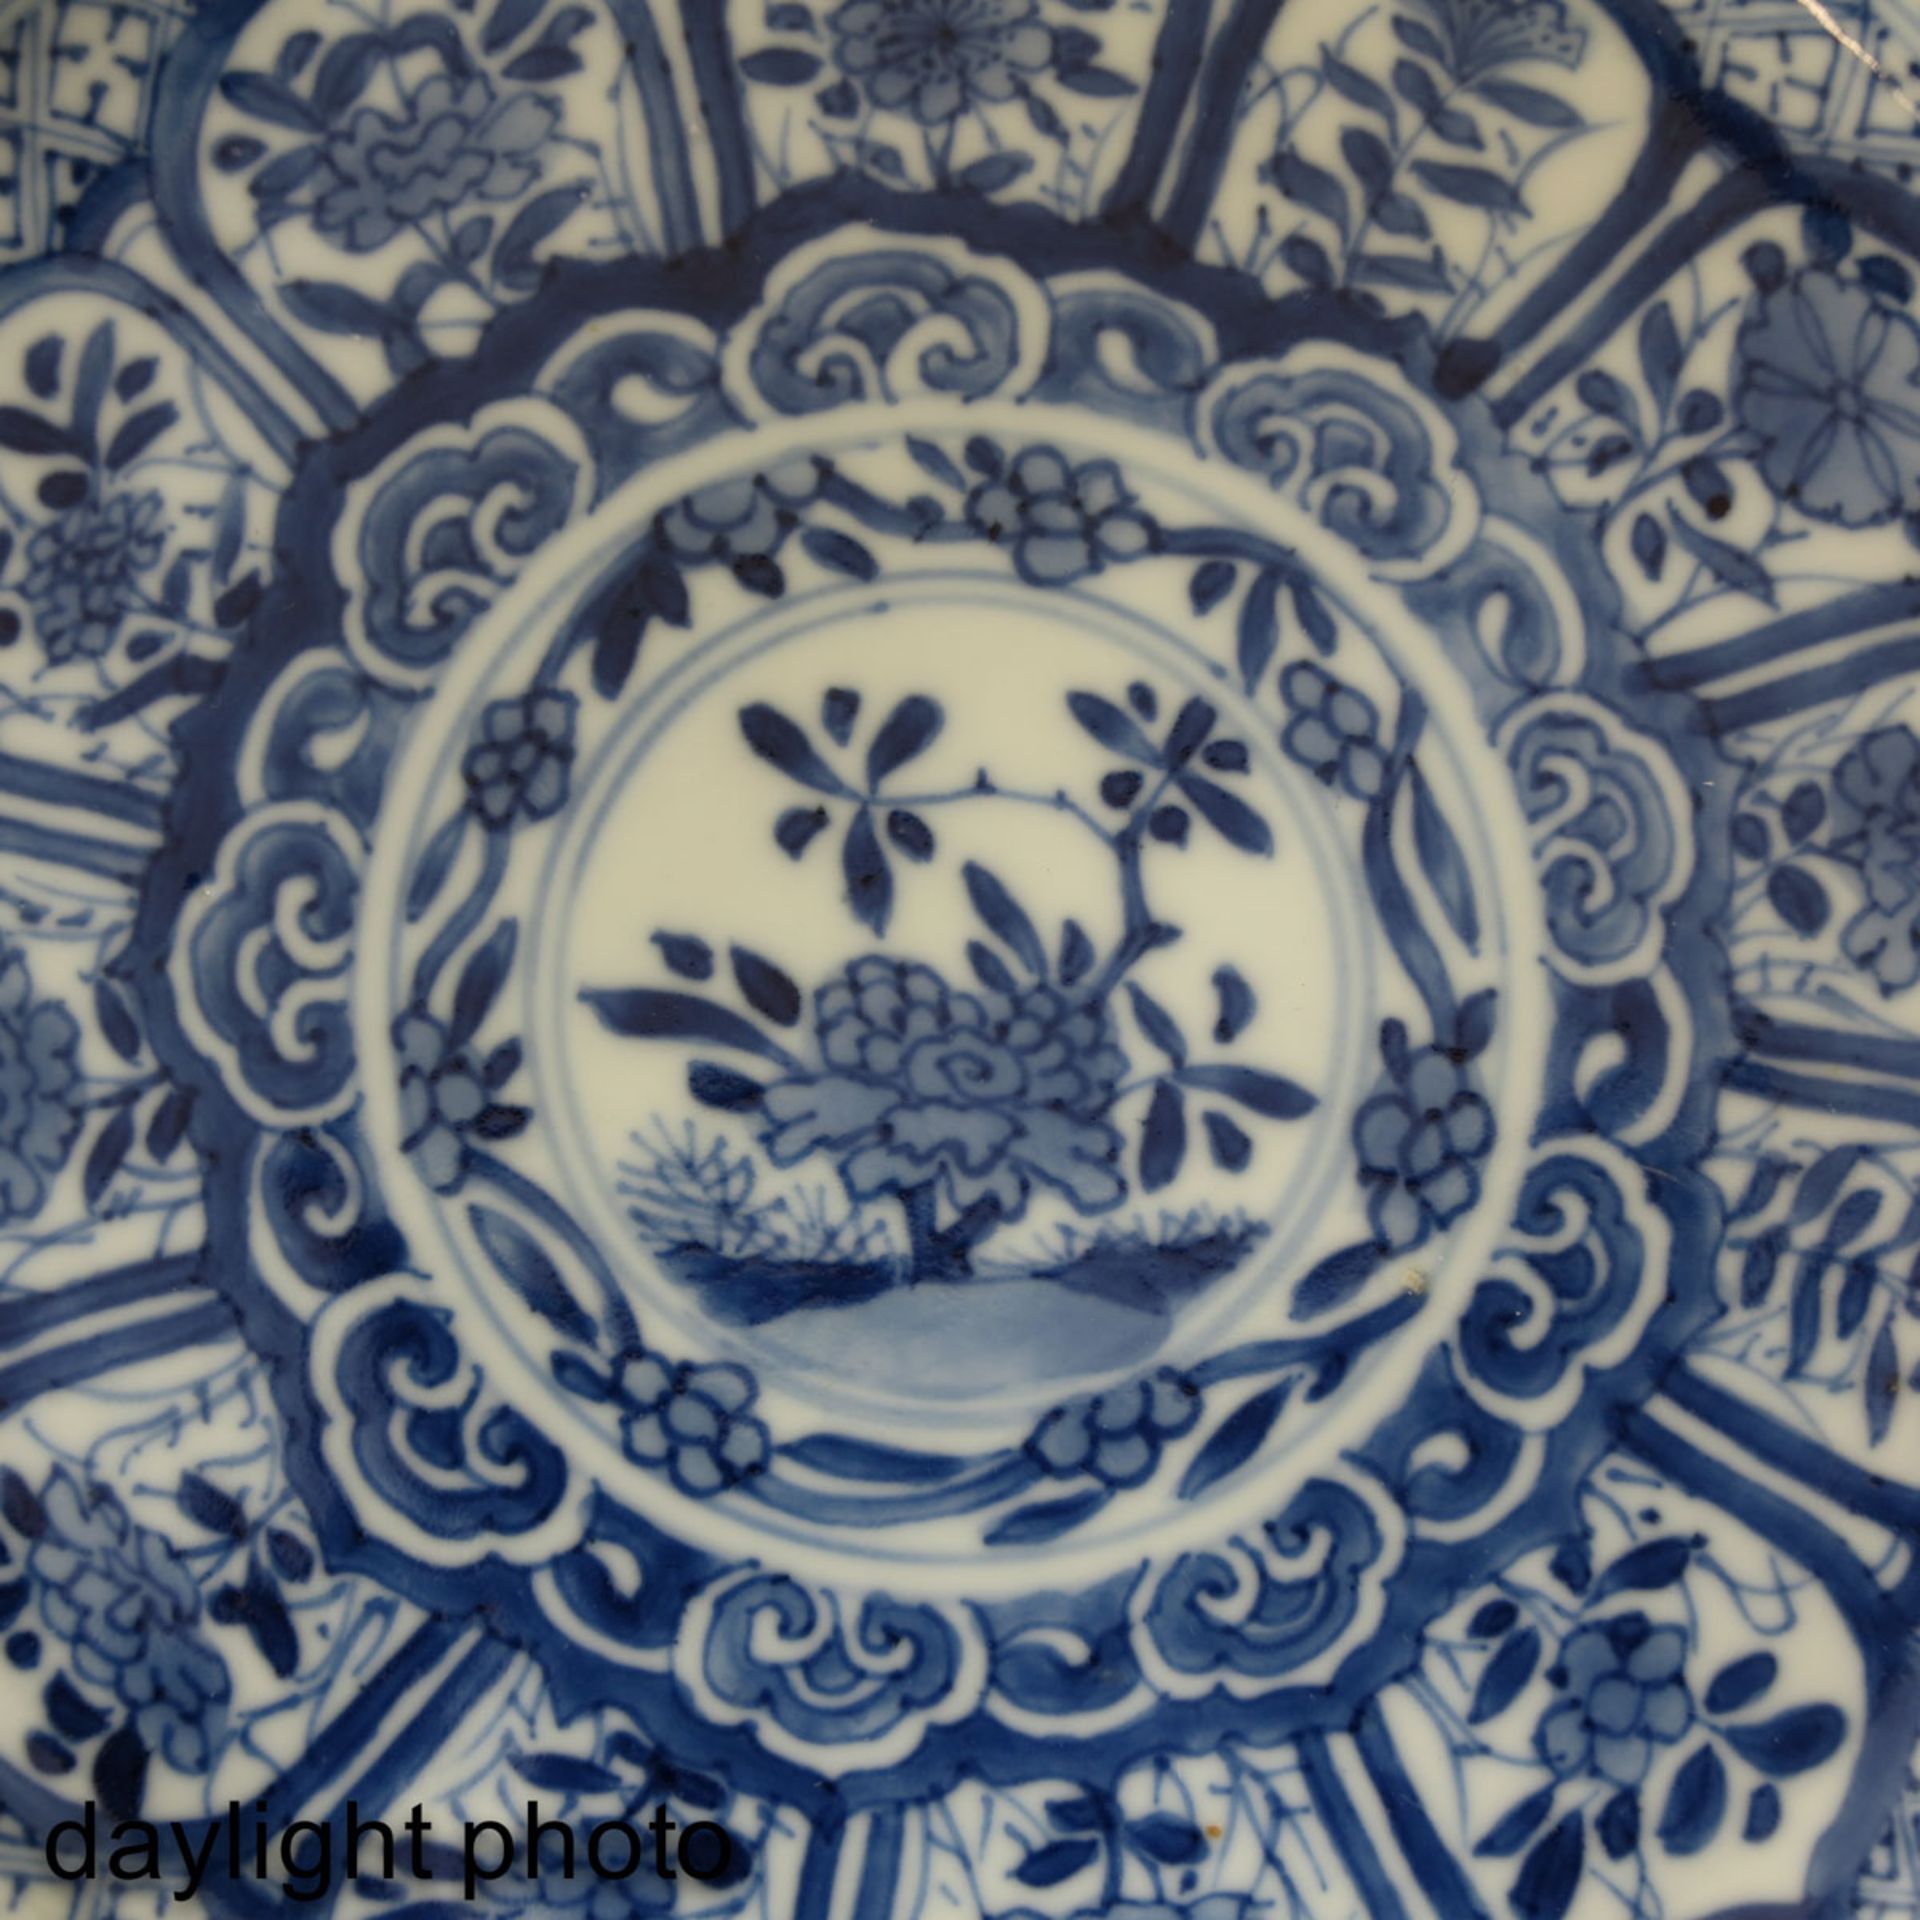 A Blue and White Kangxi Period Plate - Image 6 of 6